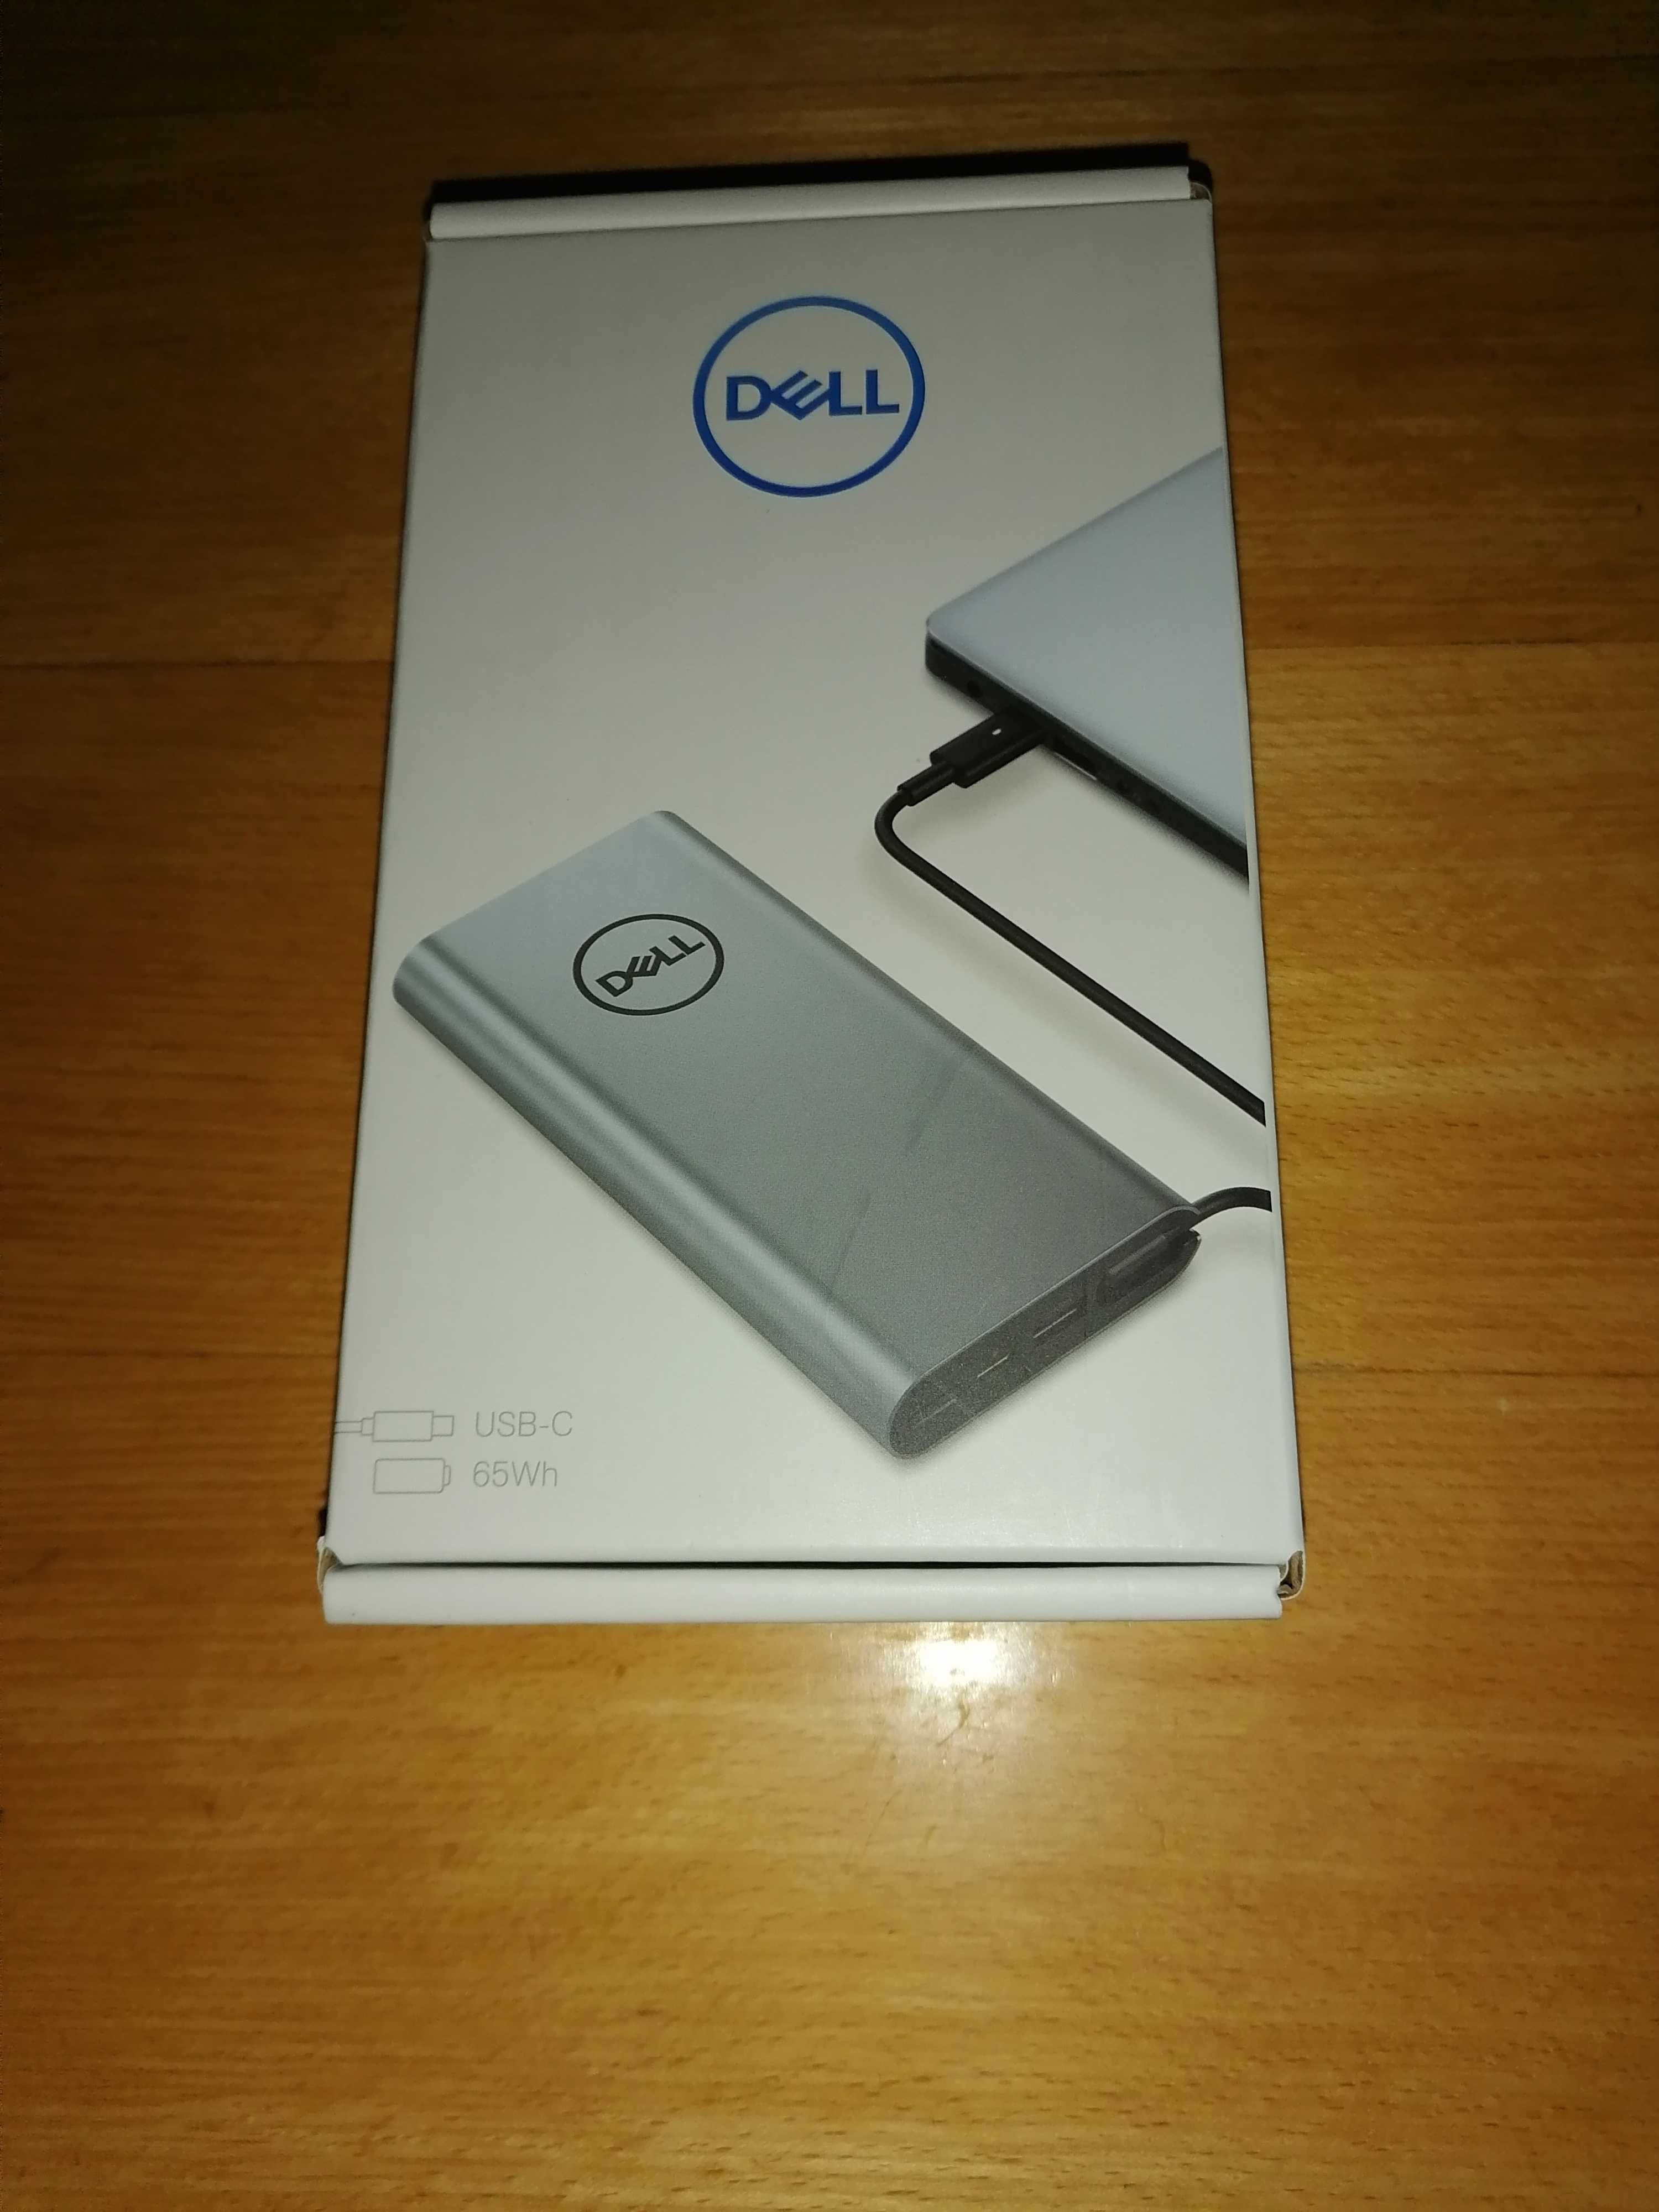 Dell Notebook Power Bank Plus - USB-C